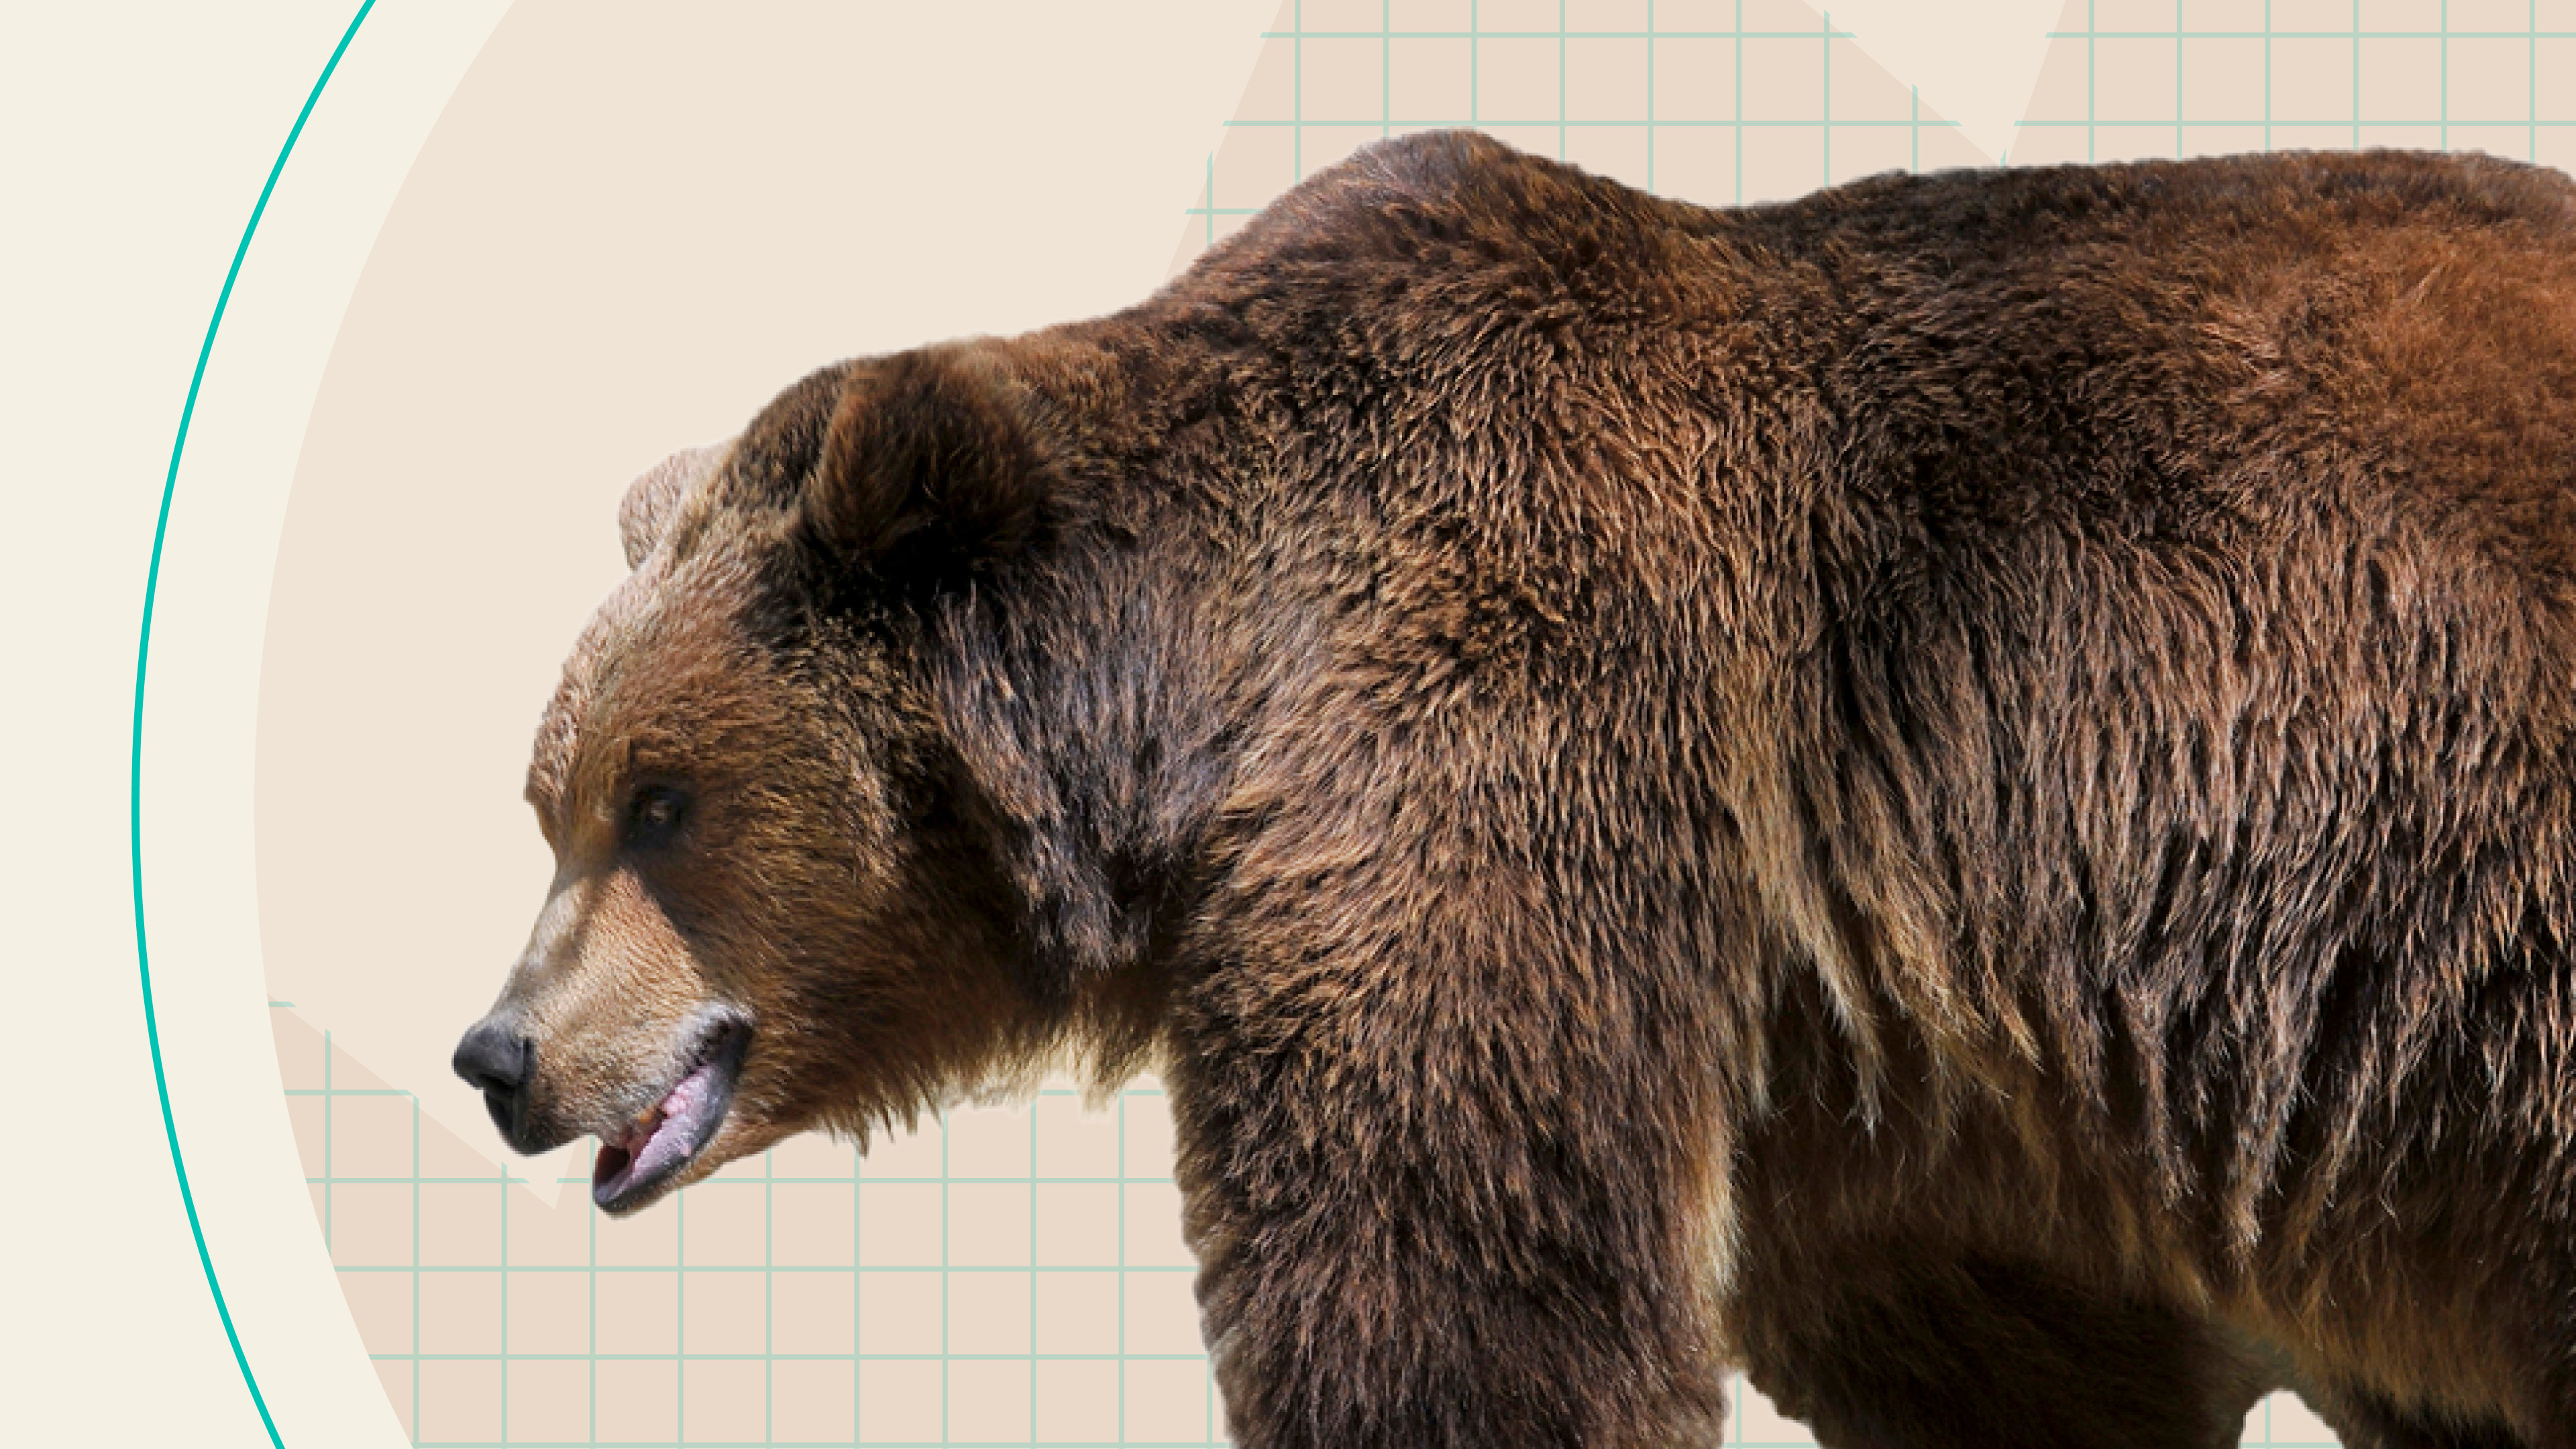 A bear in front of a market chart